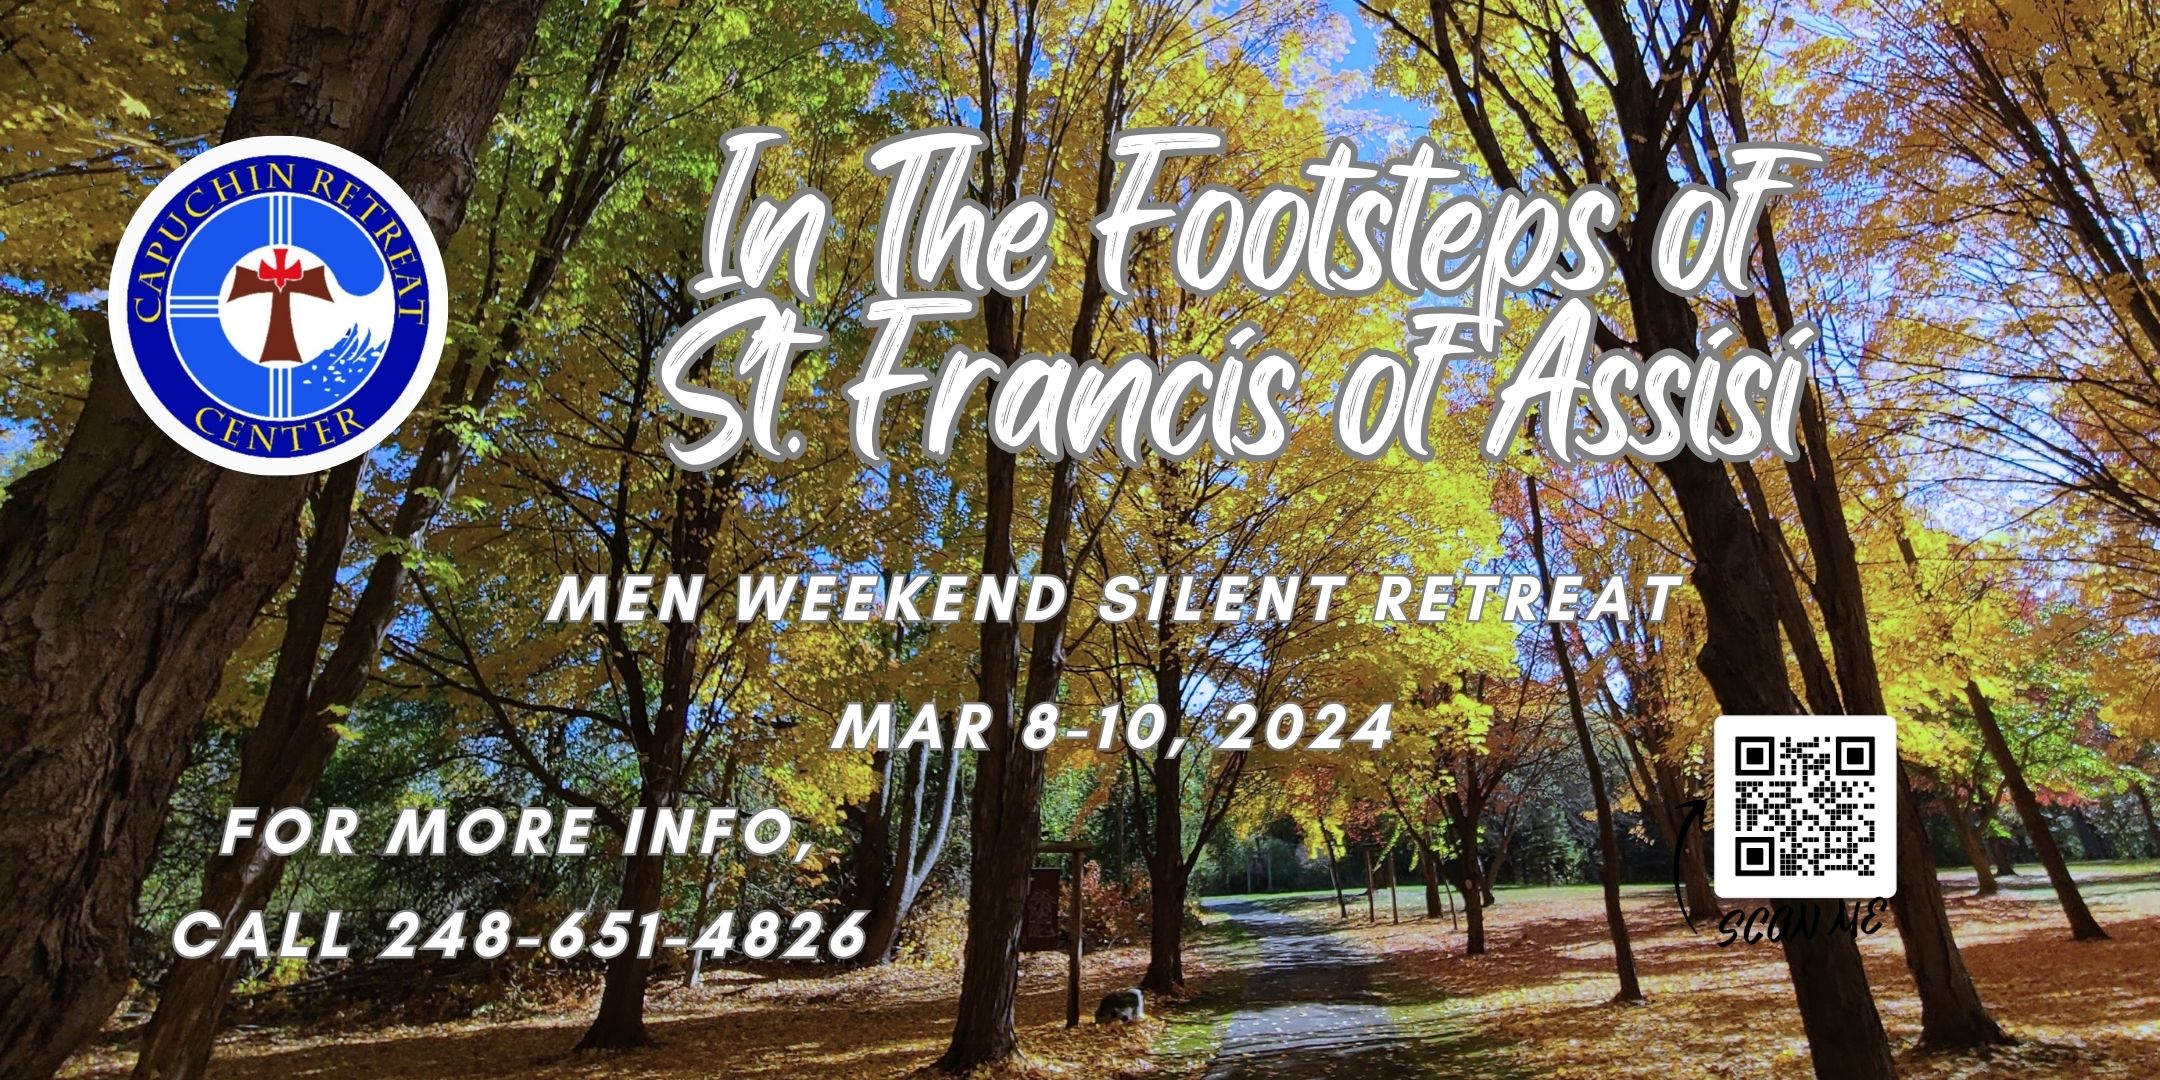 Men’s Silent Retreat Weekend: In the Footsteps of St. Francis of Assisi